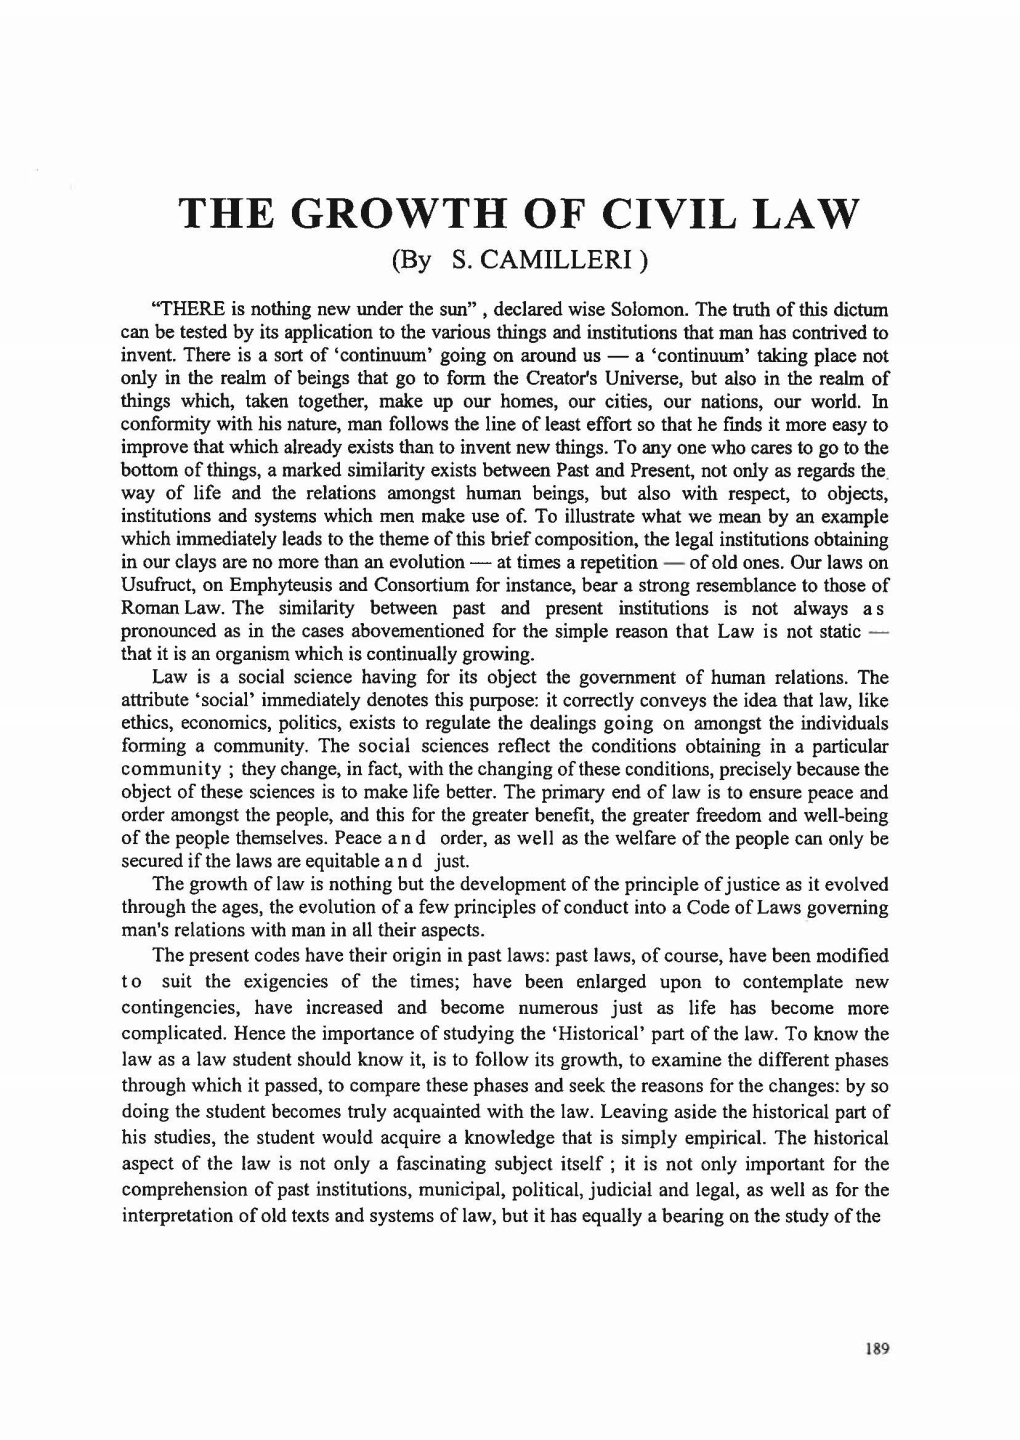 THE GROWTH of CIVIL LAW (By S